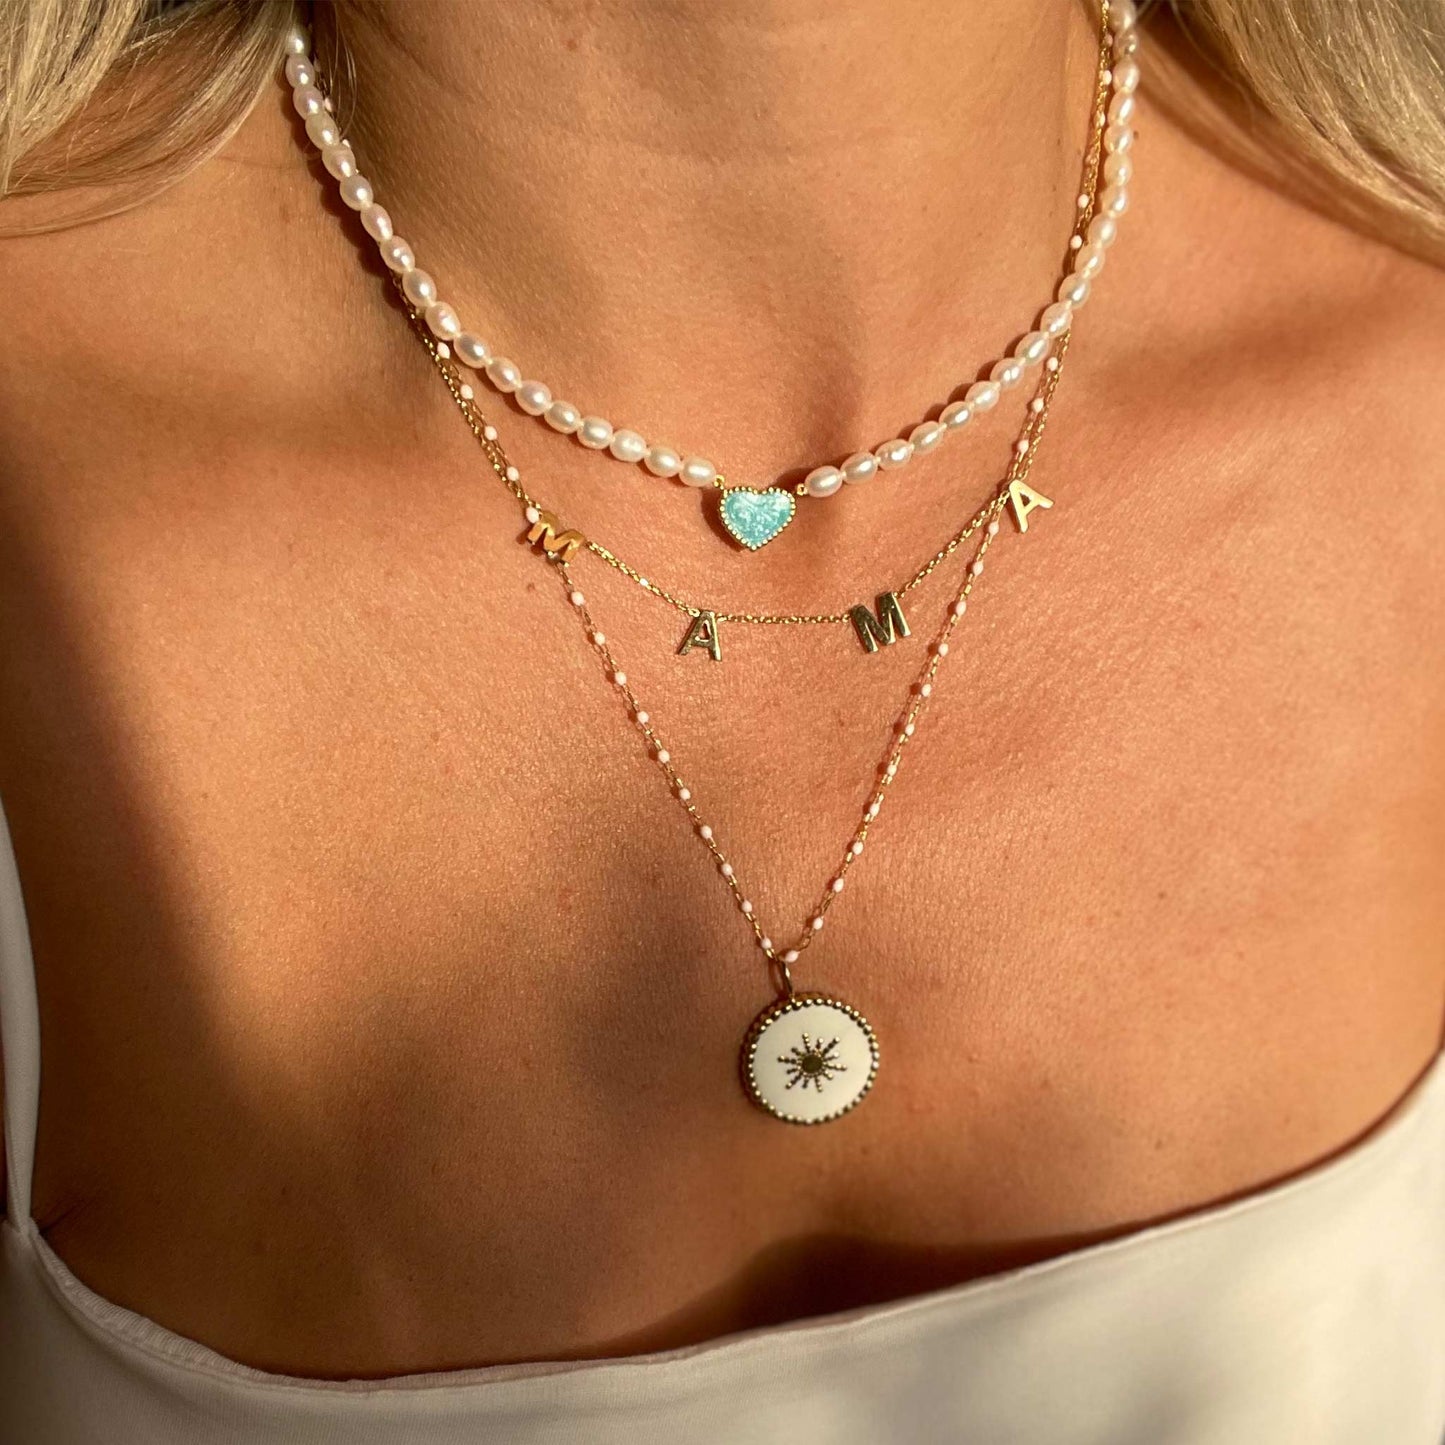 The Pearly Enamel Heart Necklace in Turquoise - Oria.jewelry